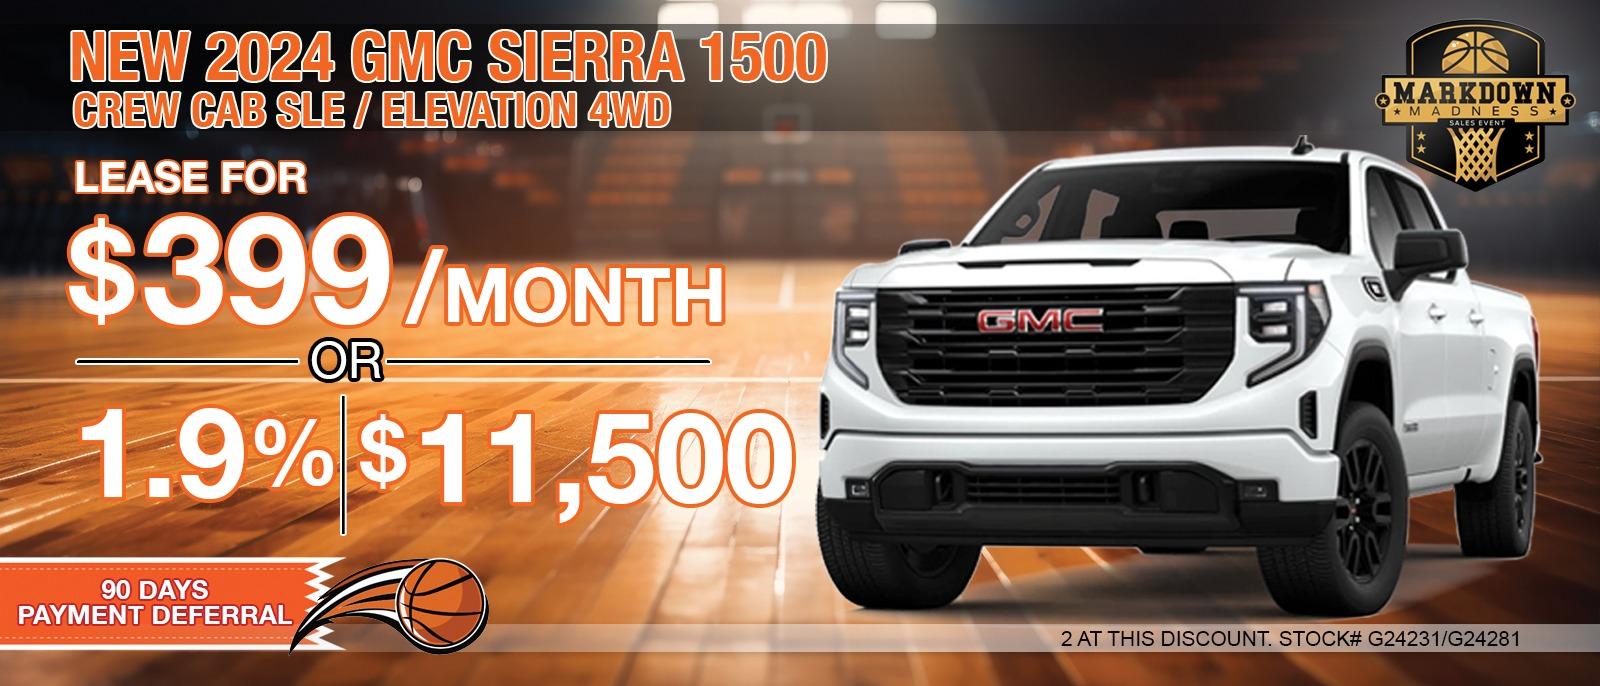 2024 GMC SIERRA 1500 CREW CAB SLE / ELEVATION 4WD. Your Net Savings After All Offers save up to $11,500